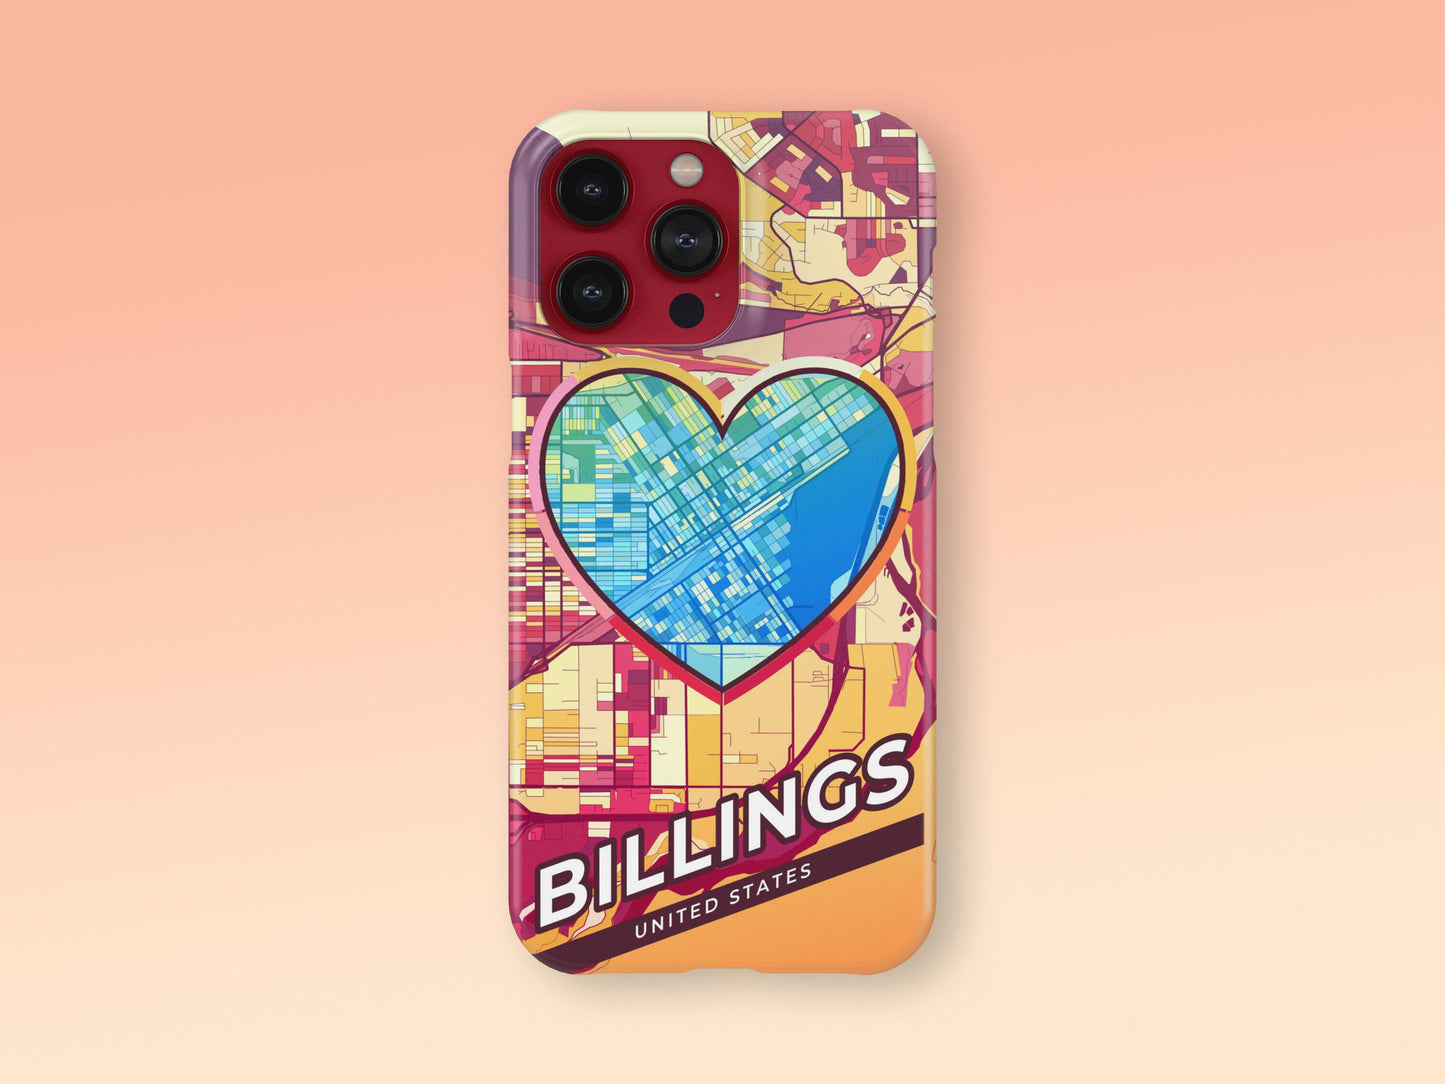 Billings Montana slim phone case with colorful icon. Birthday, wedding or housewarming gift. Couple match cases. 2